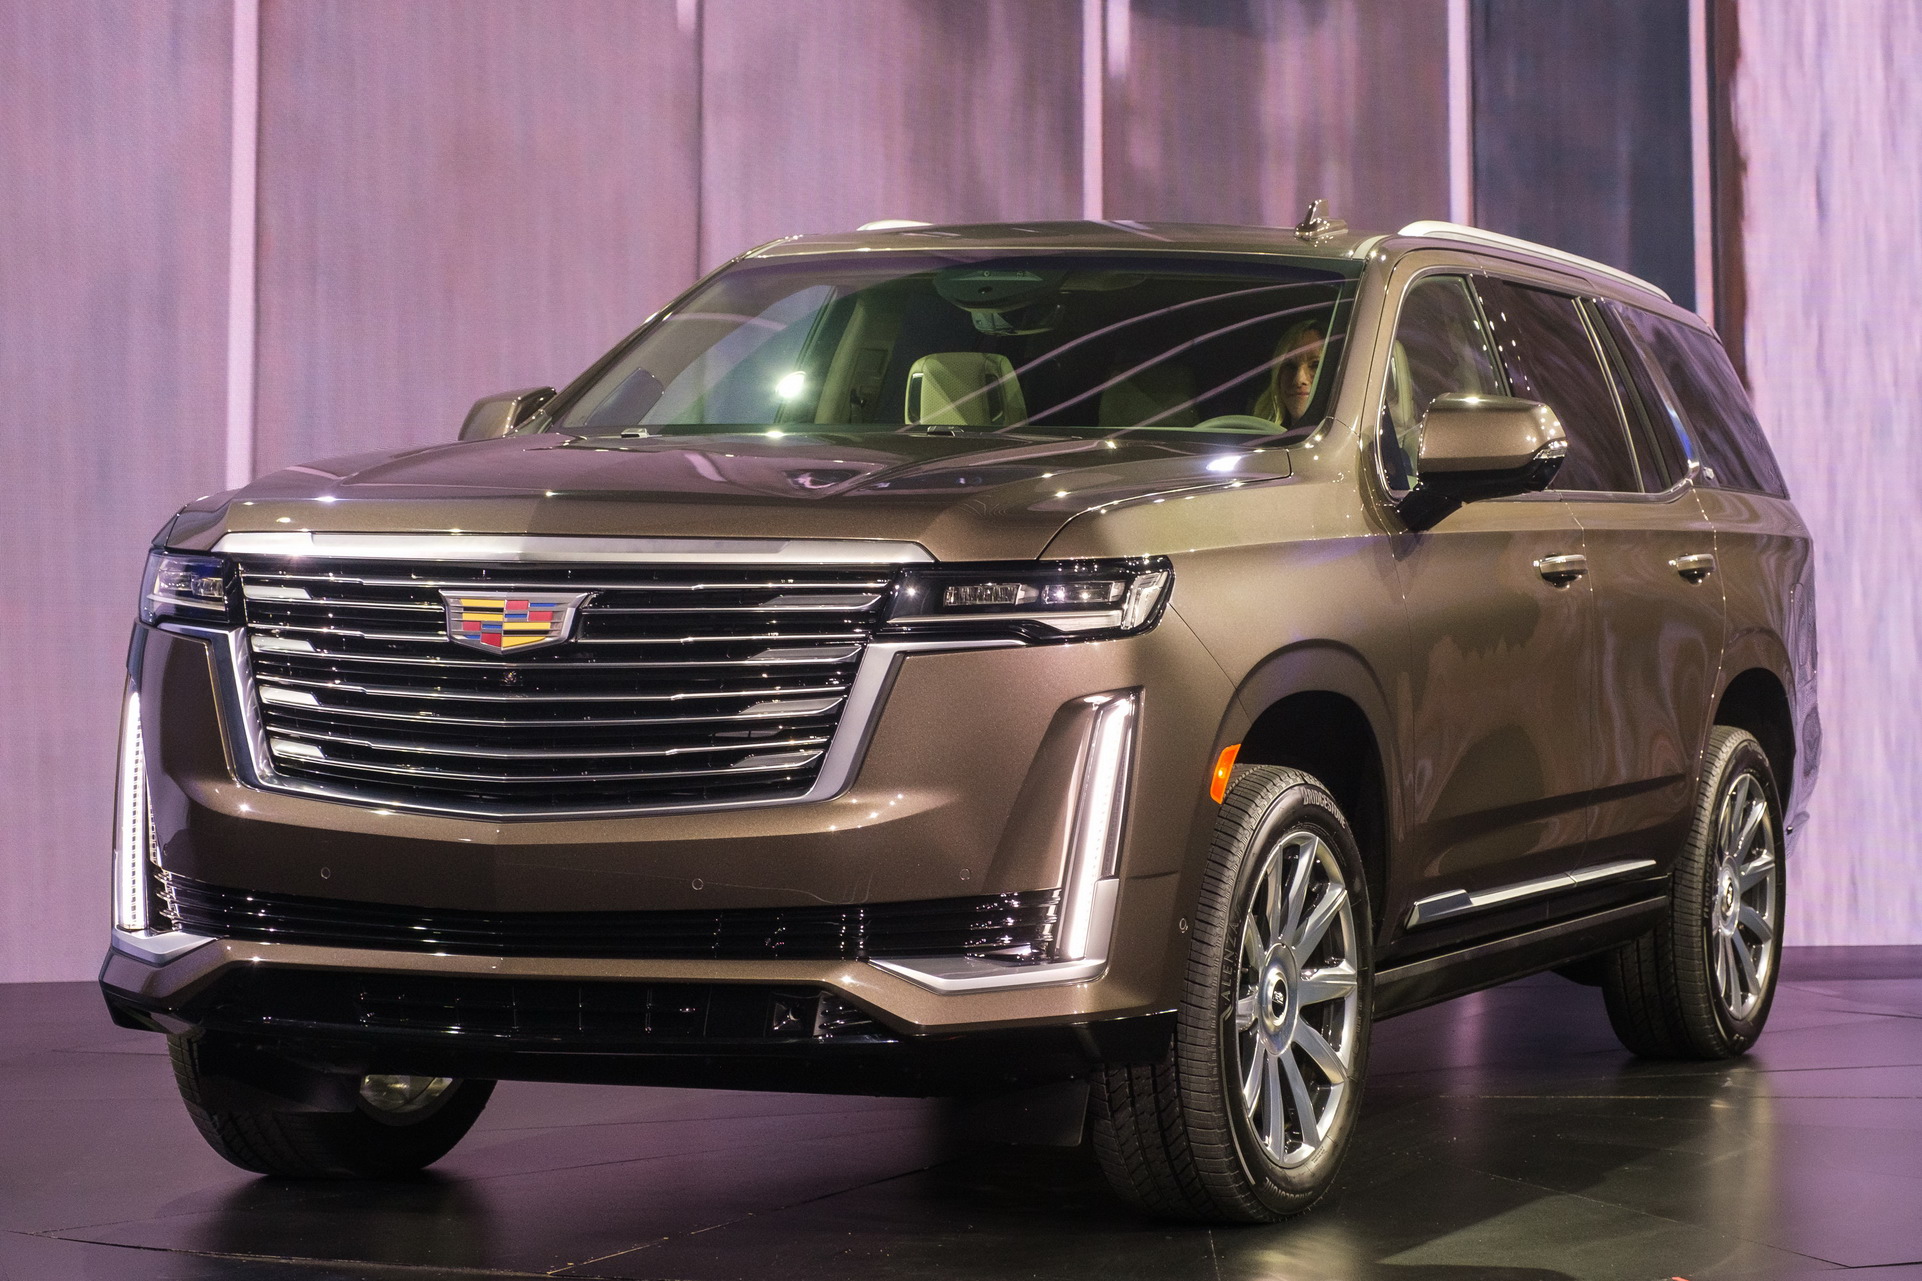 2021 Cadillac Escalade Embraces Luxury And Tech To Distance Itself